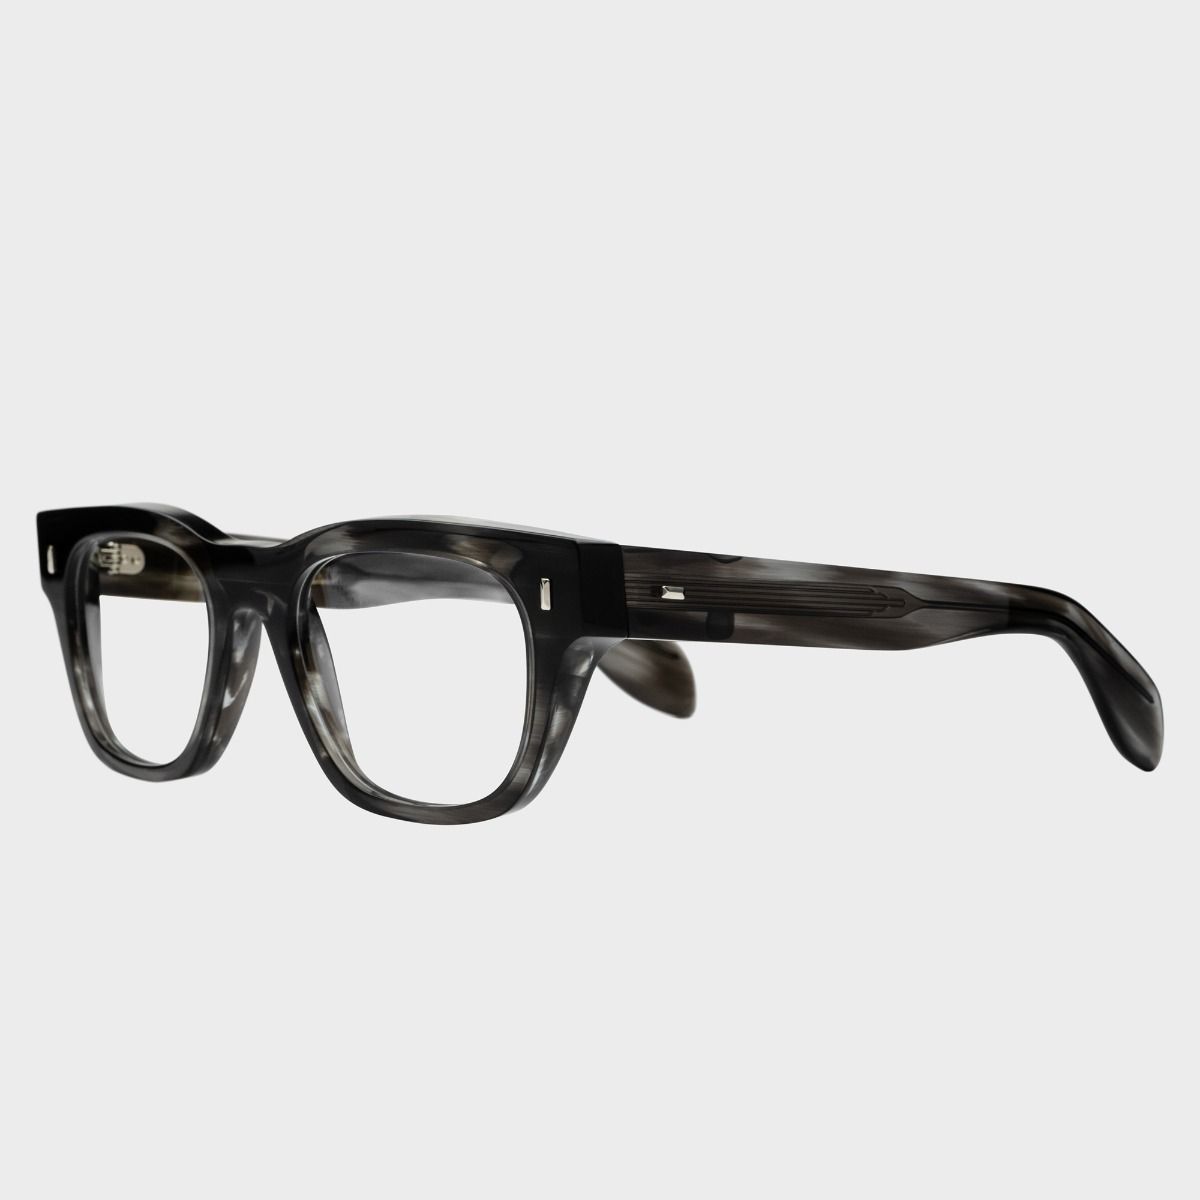 Cutler and Gross, 9772 Optical Square Glasses - Green Smoke